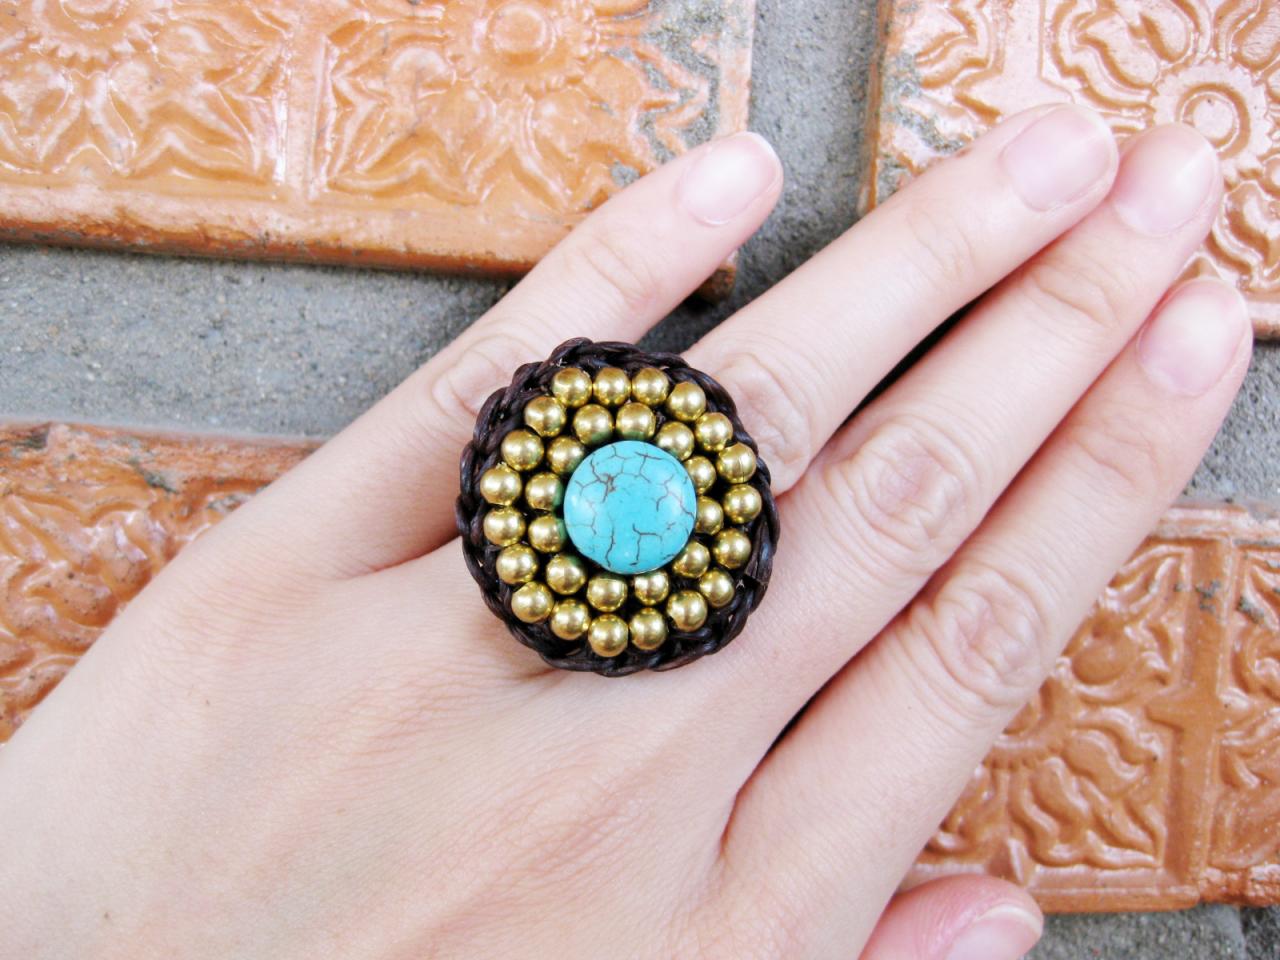 Circle Turquoise And Brass Beads - Adjustable Ring, Jewelry Thailand Handmade. (jr1017)